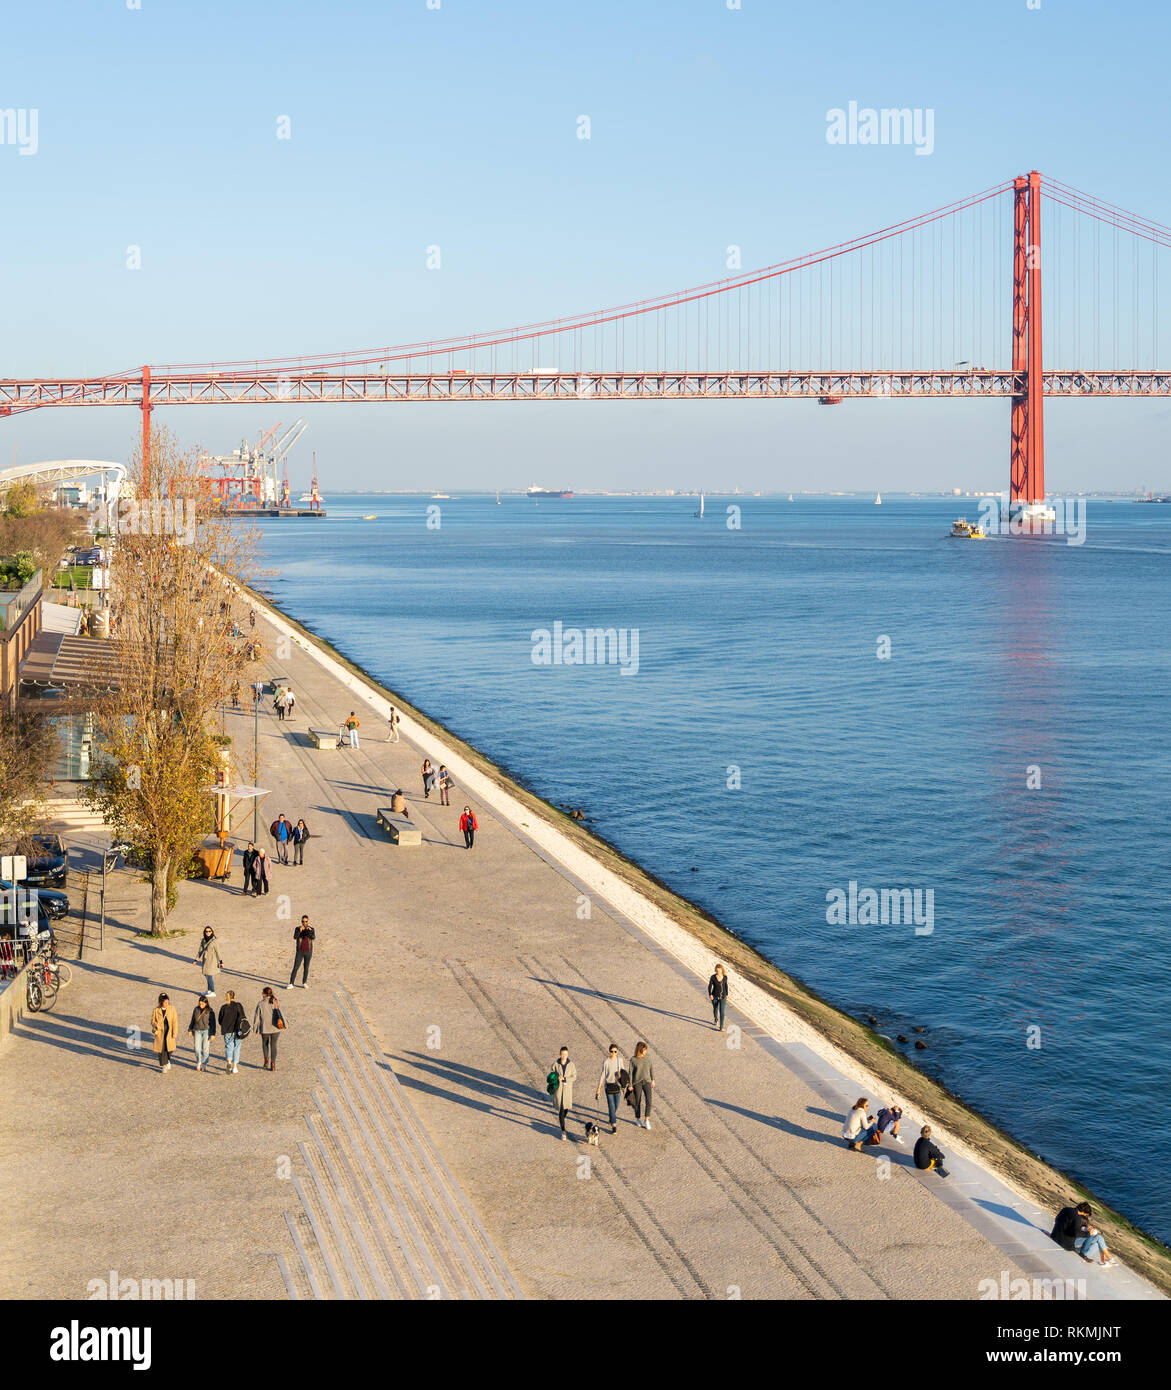 Lisbon, Portugal - 12/28/18: Pedestrian walkway riverside, tagus river. View of the 25 april red bridge, lots of people passing by walking Stock Photo